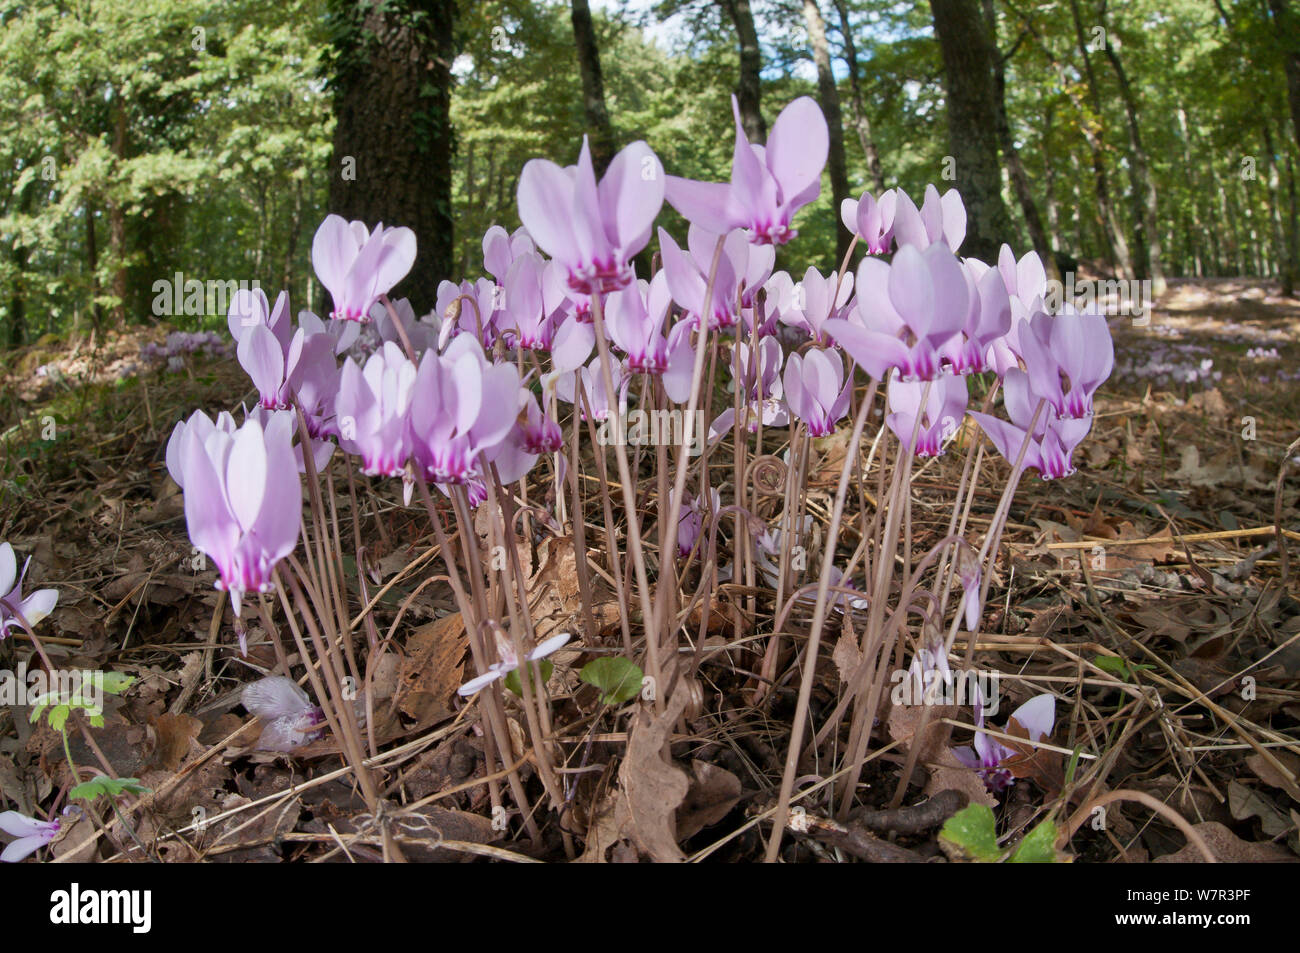 Sowbread (Cyclamen hederifolium) an autumn flowering species near the Etruscan tombs at Norchia, near Viterbo, Lazio, Italy, September Stock Photo